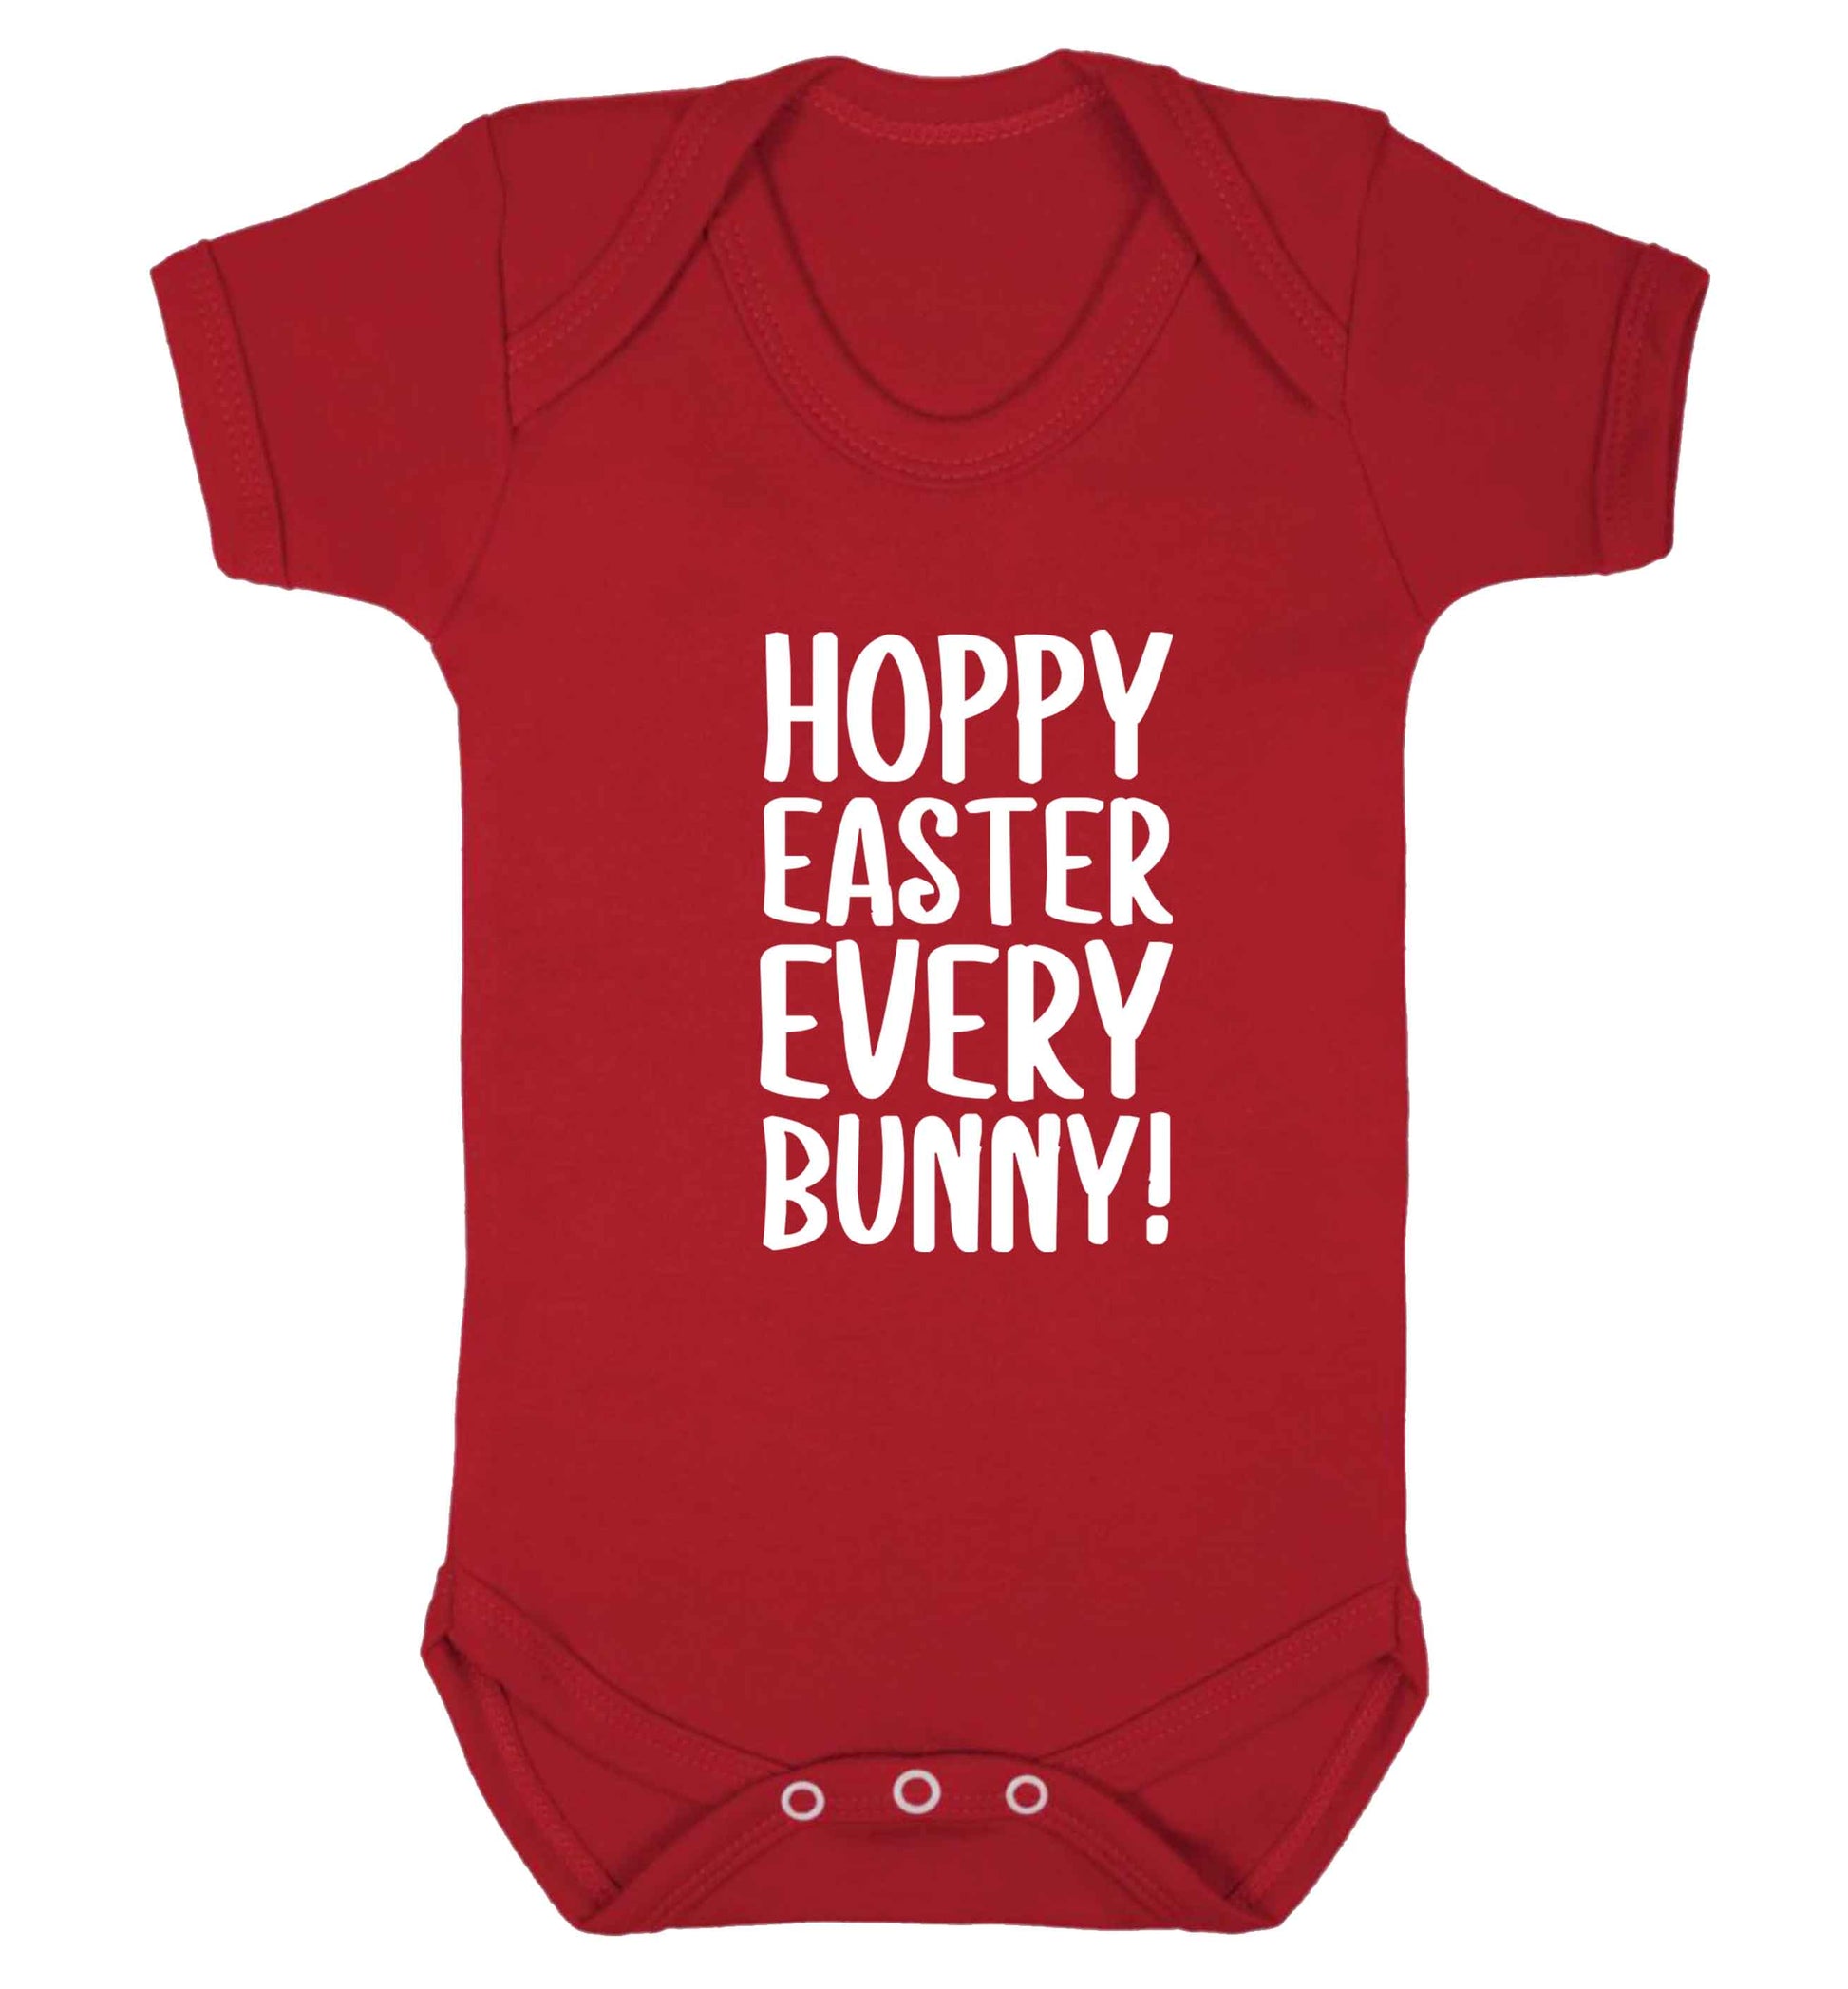 Hoppy Easter every bunny! baby vest red 18-24 months